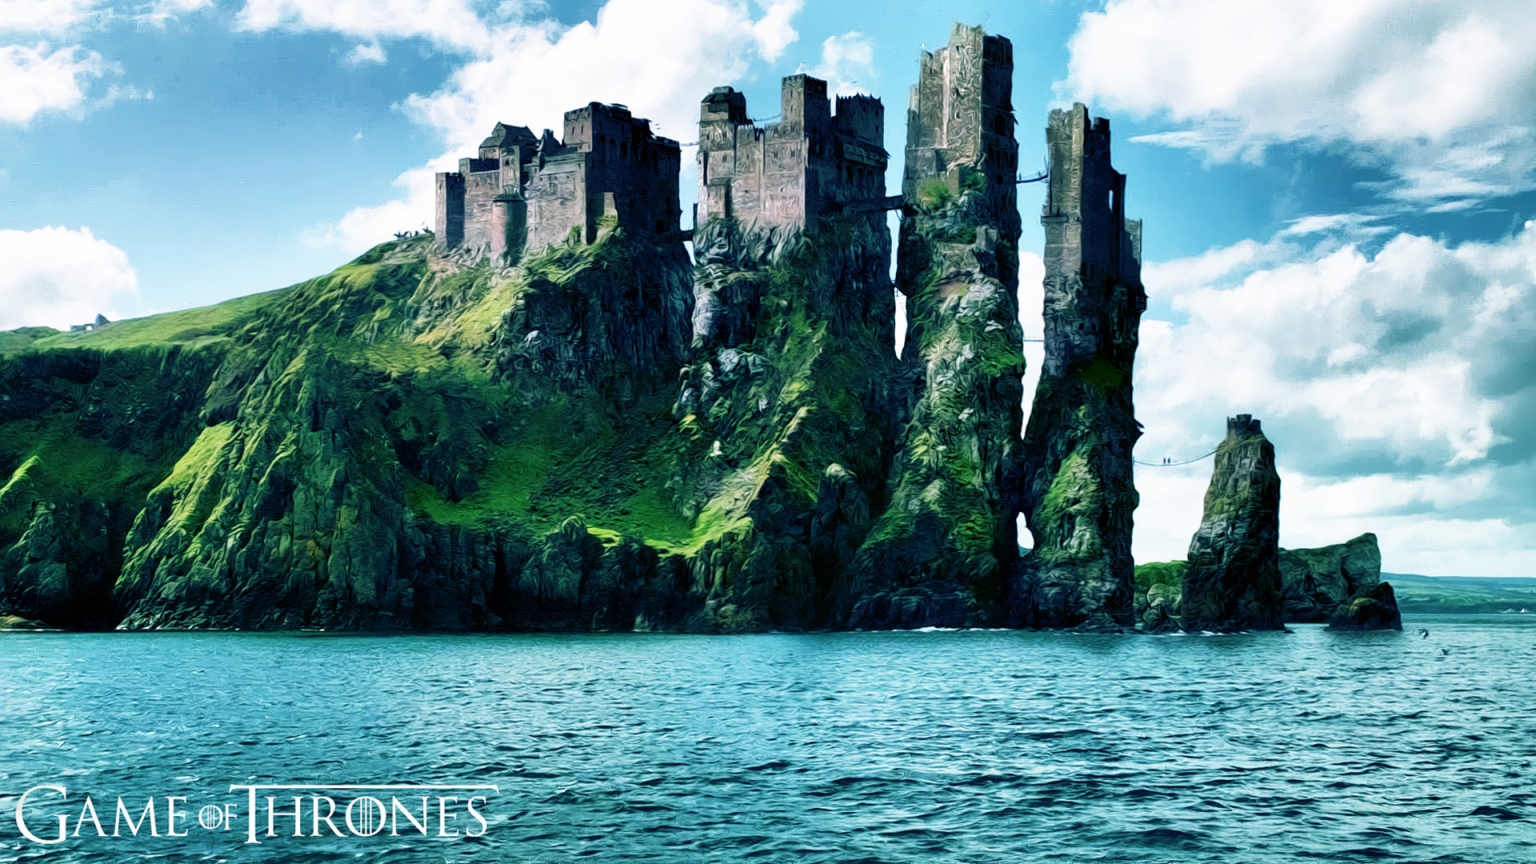 Pyke Game Of Thrones for 1536 x 864 HDTV resolution